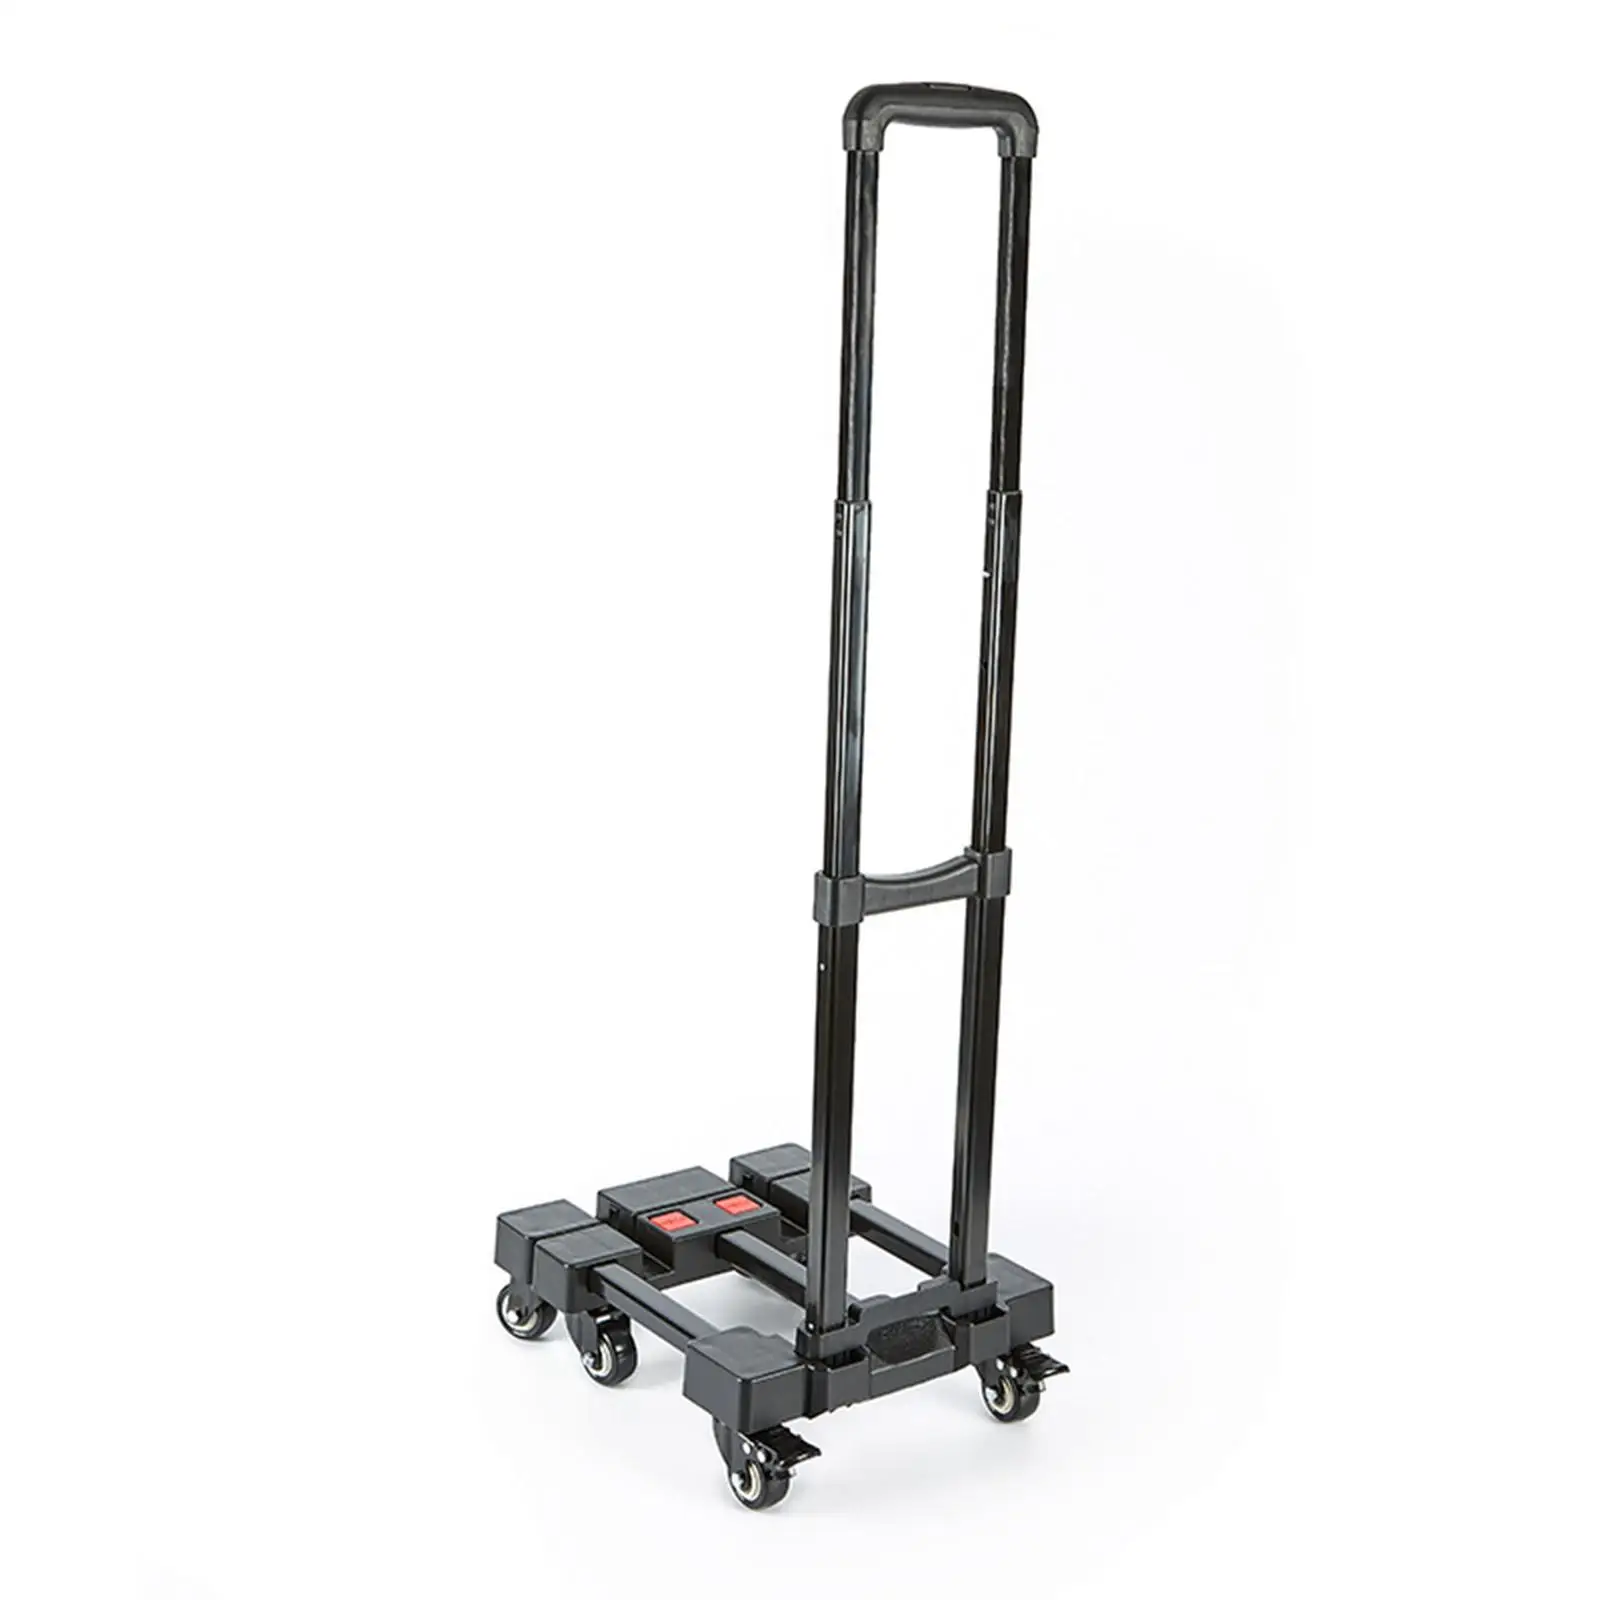 Folding Hand Truck with Adjustable Handle Shopping Cart for Easy Moving Outdoor Houshold Office Maximum Load 100kg (220lb)